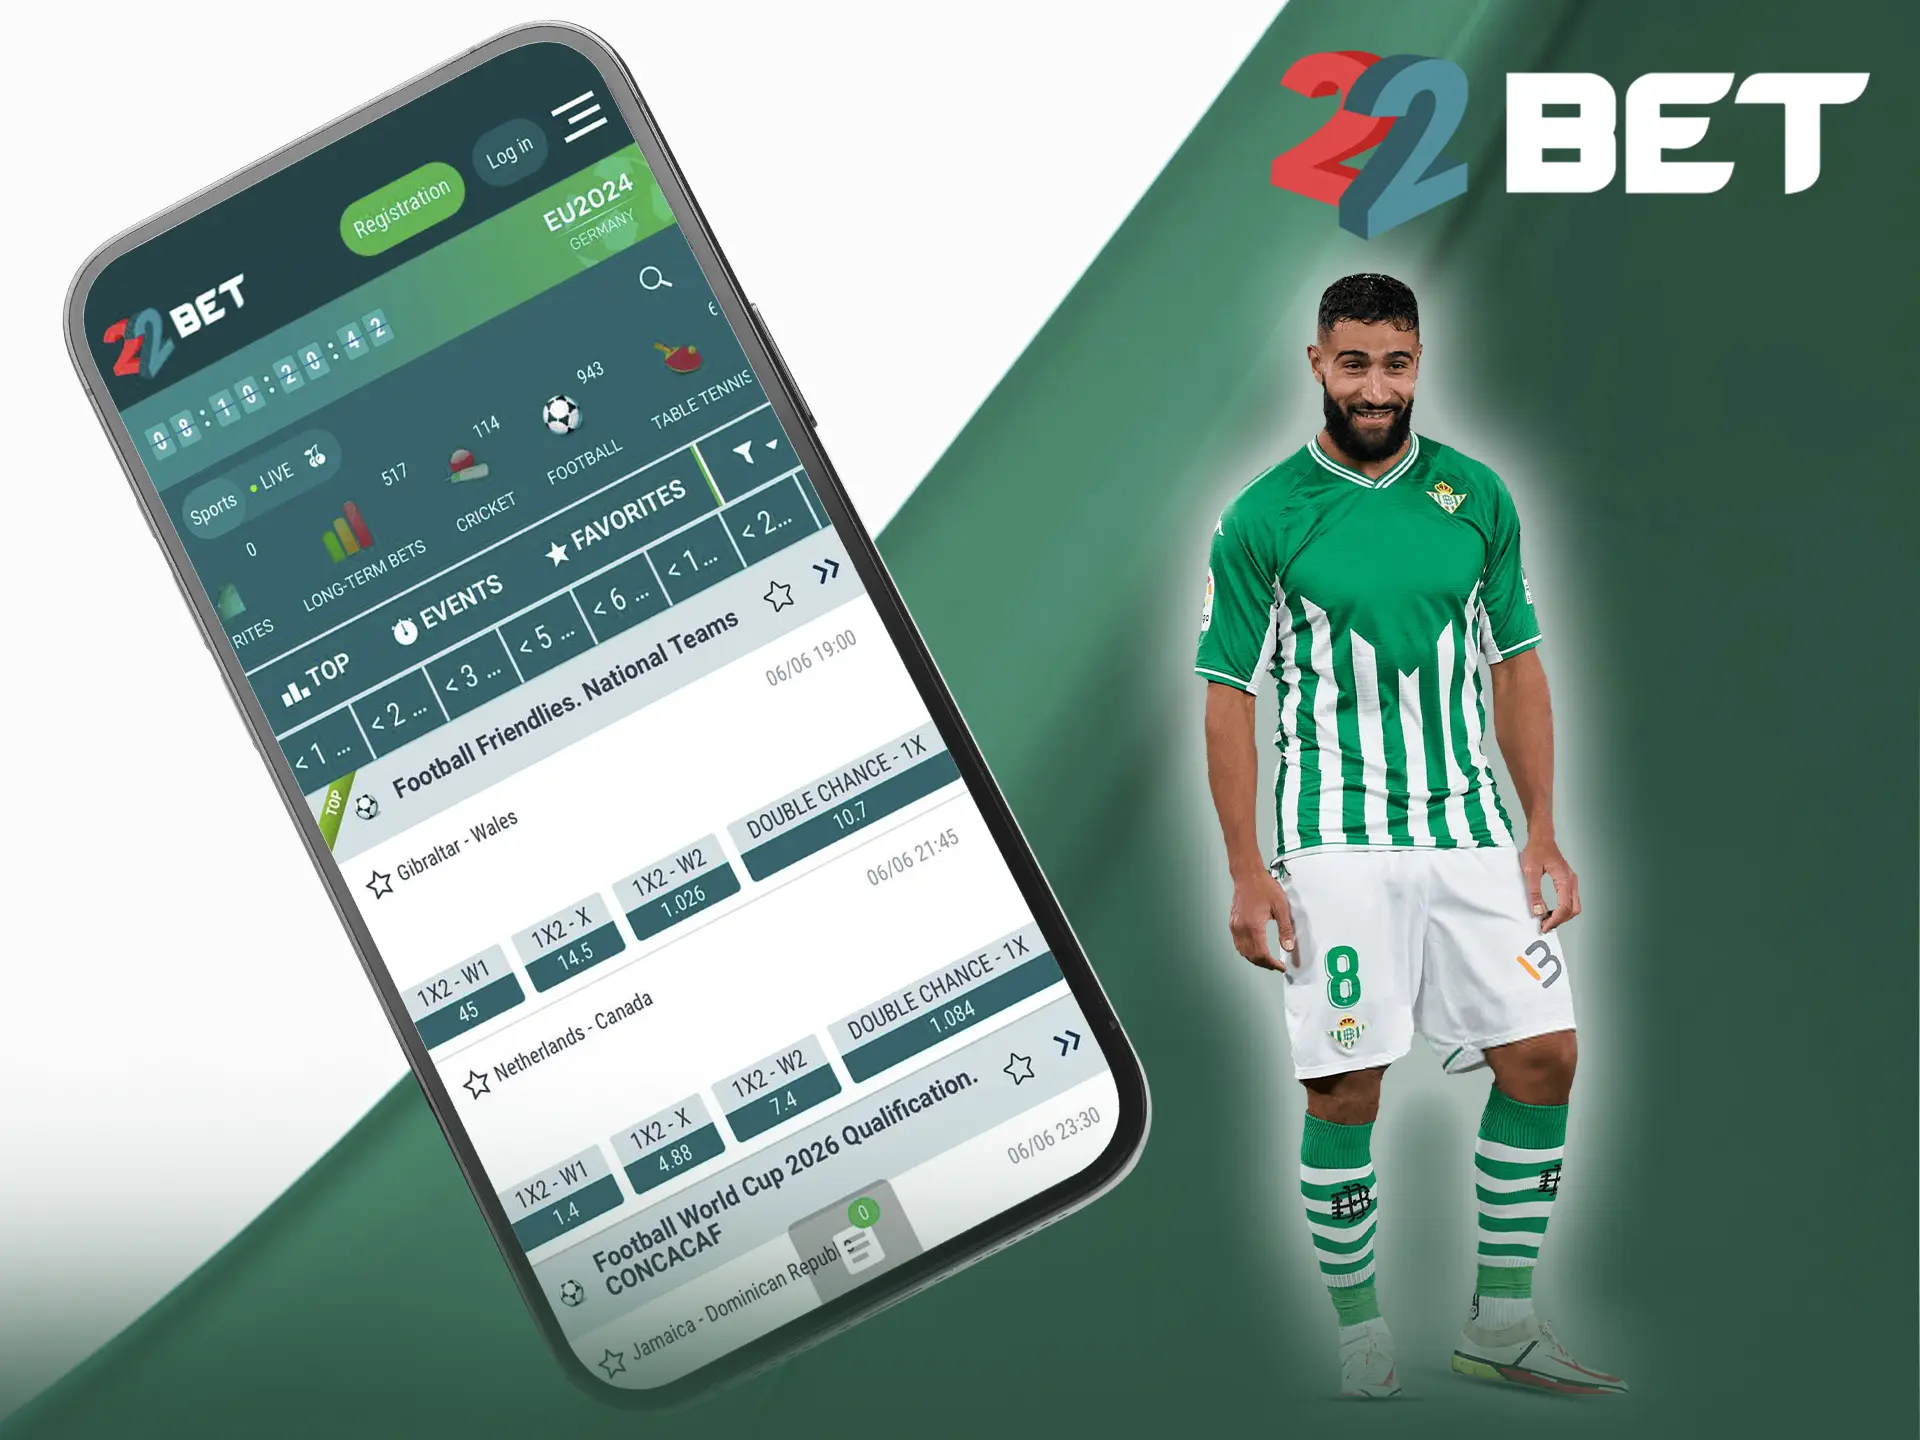 Instant payouts and an intuitive interface, you'll find it all in the 22Bet app.